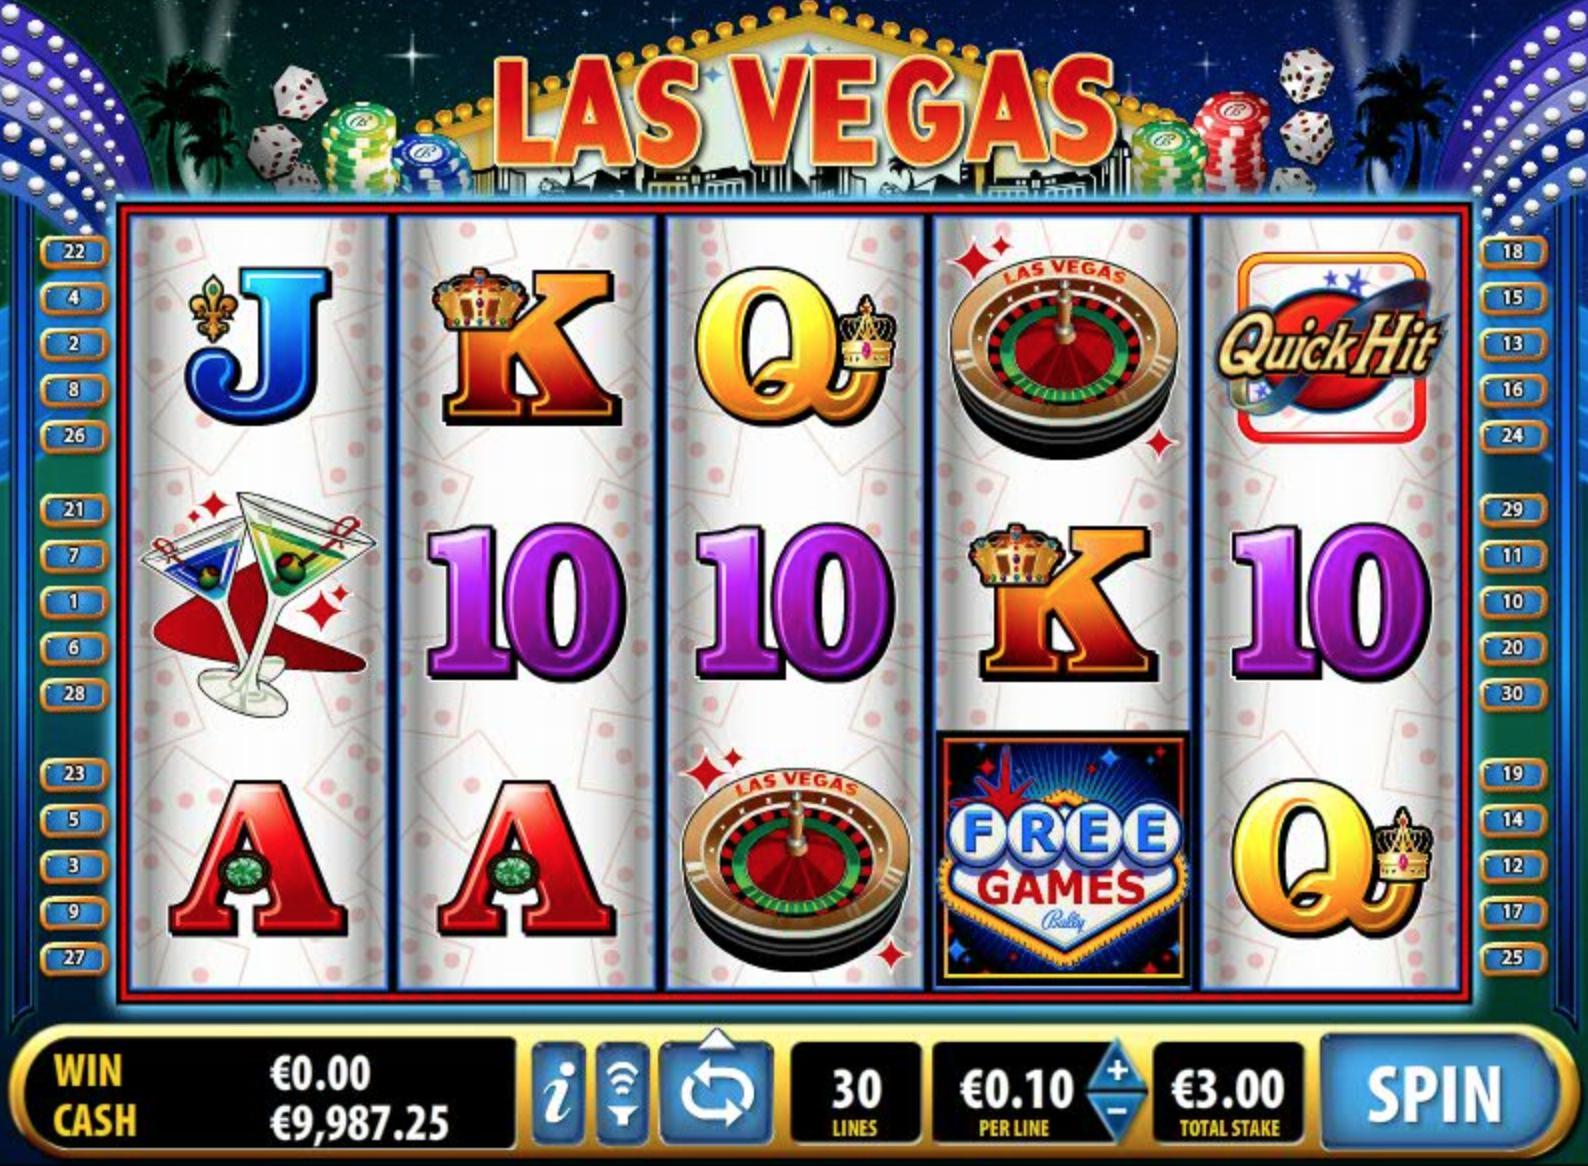 Quick Hit Las Vegas How To! - Slots Game Tips and Tricks!